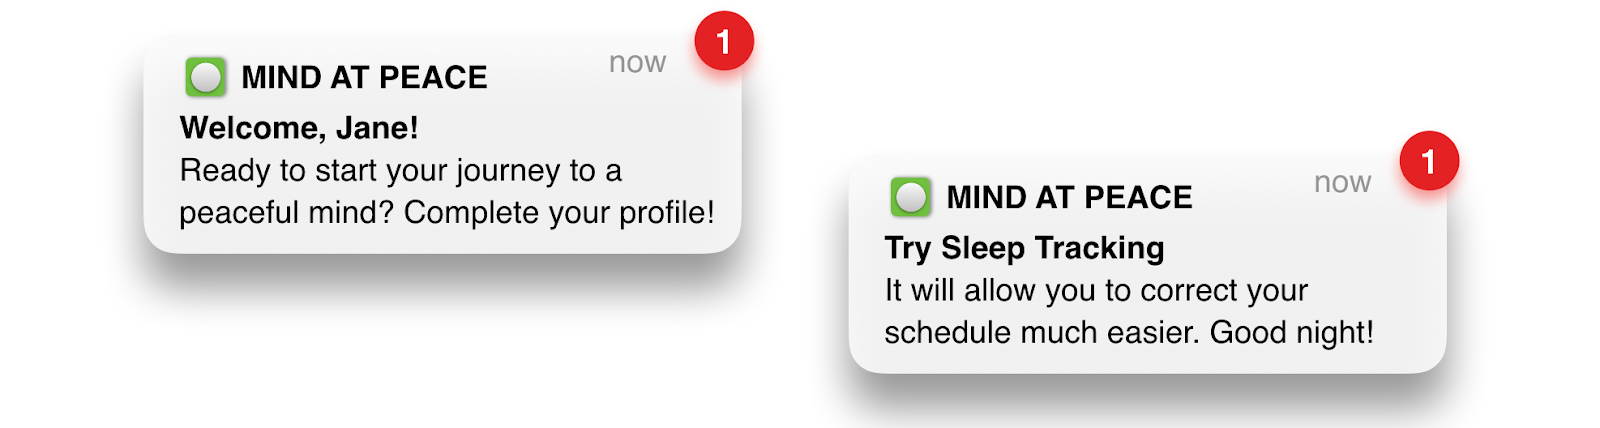 Automated user activation reminders